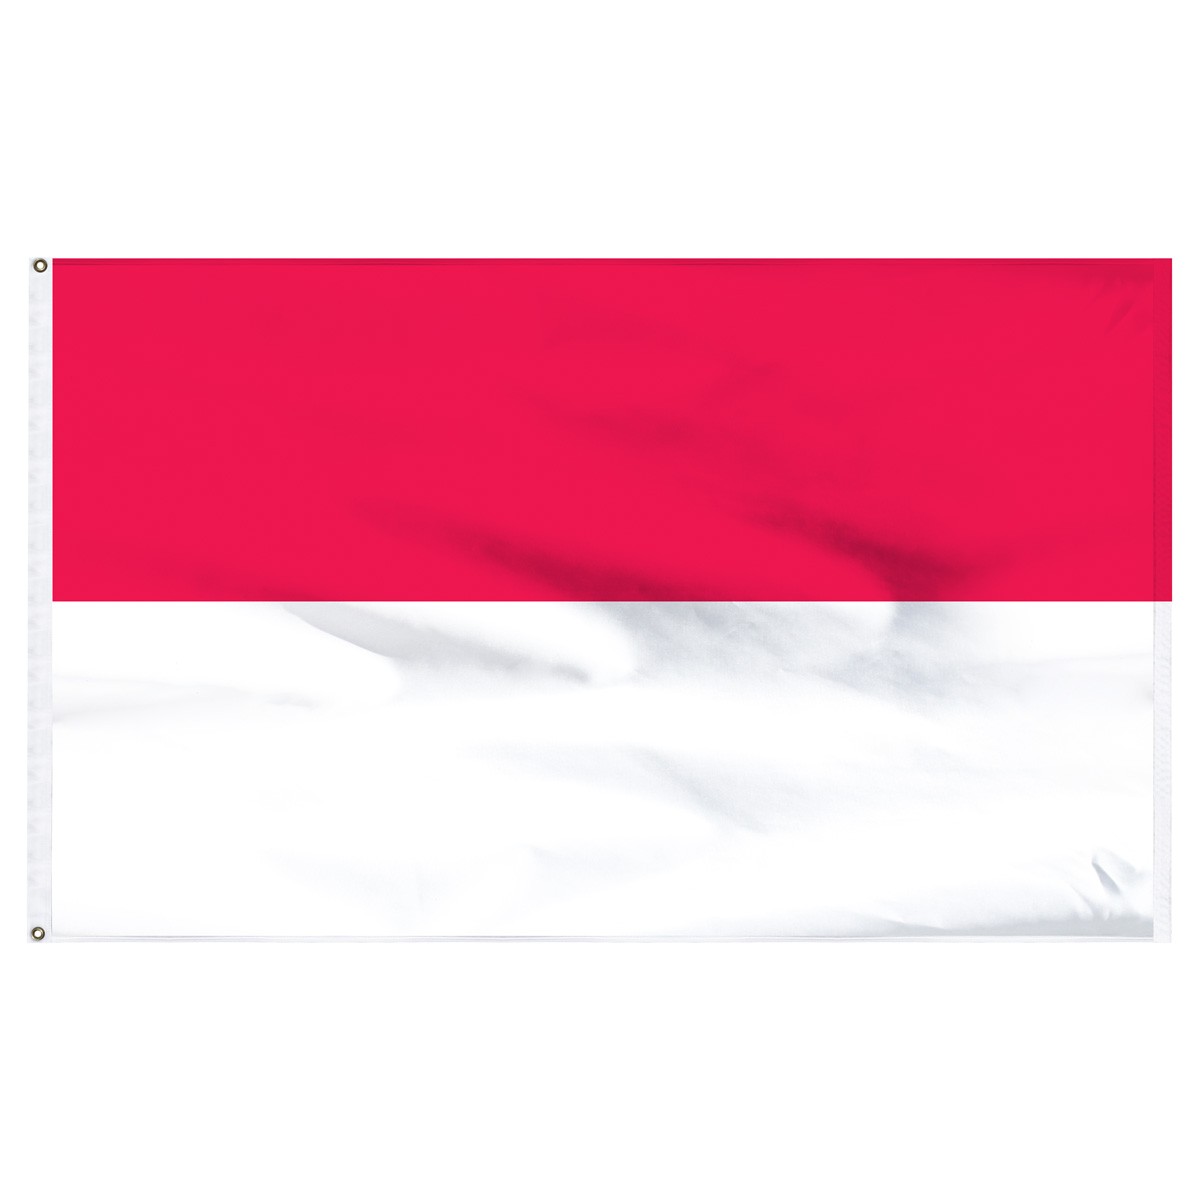 Indonesia Horizontal Streamers and Flags